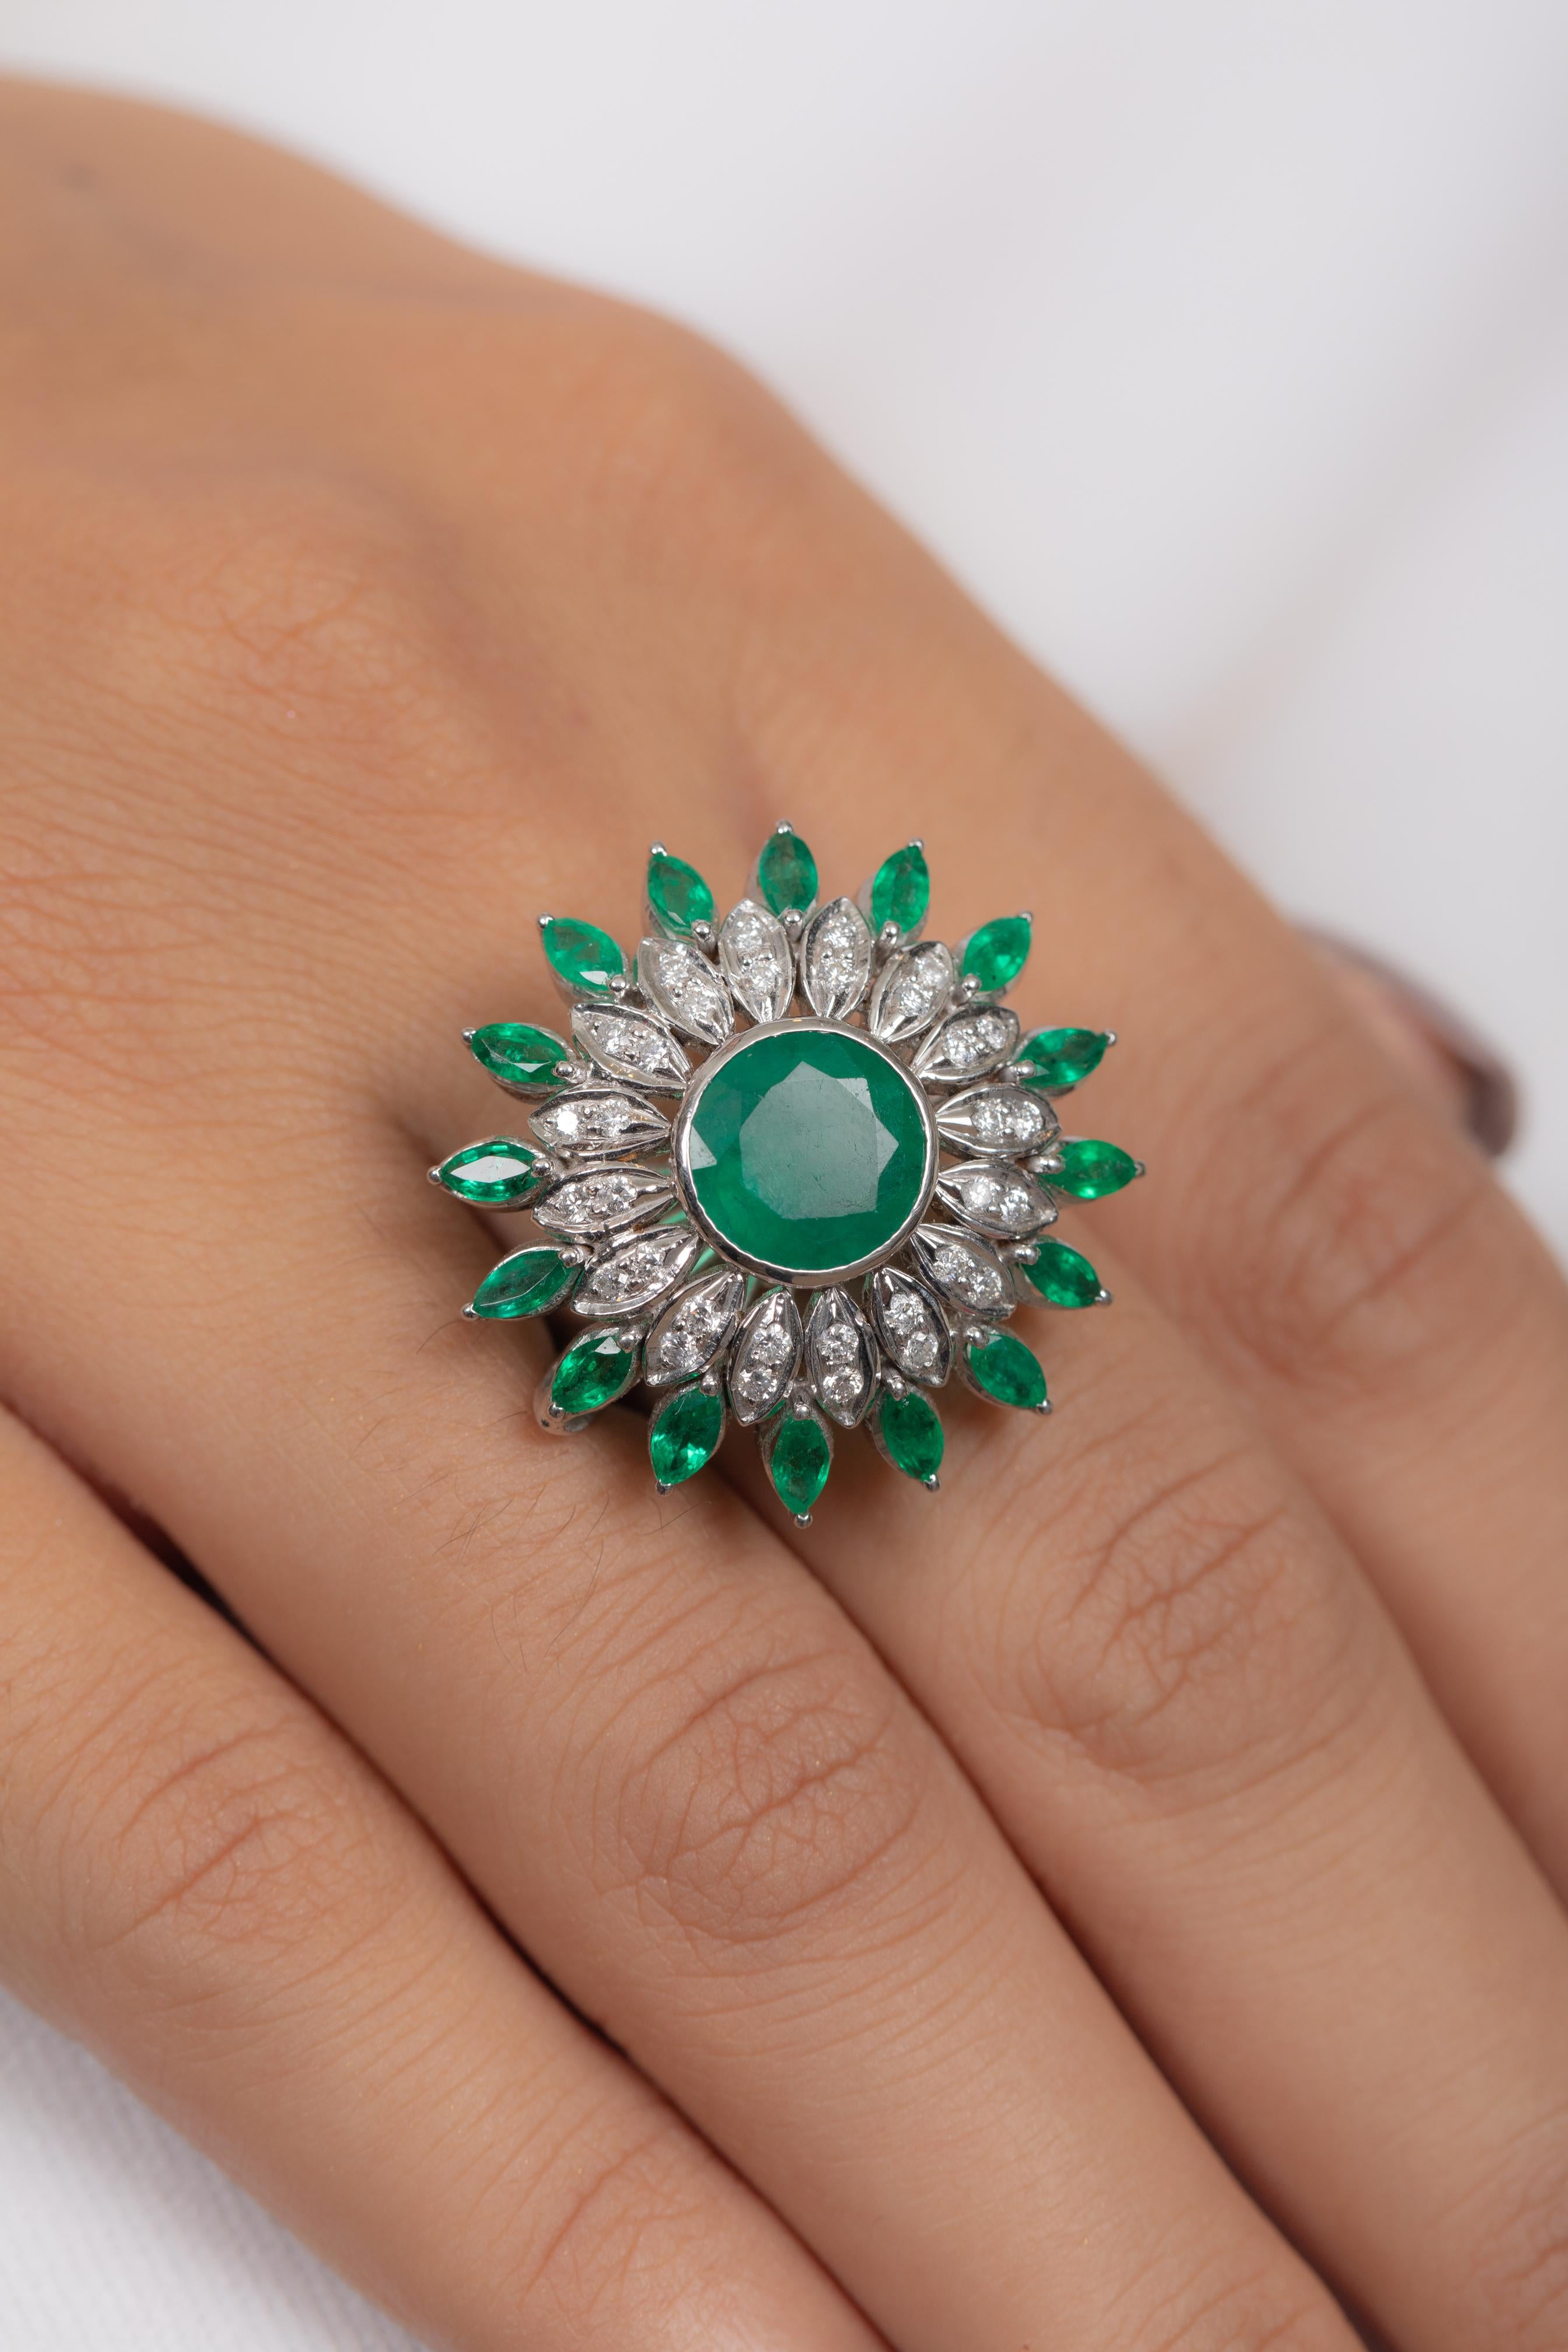 For Sale:  Statement Emerald Ring in 18K White Gold with Diamonds 2